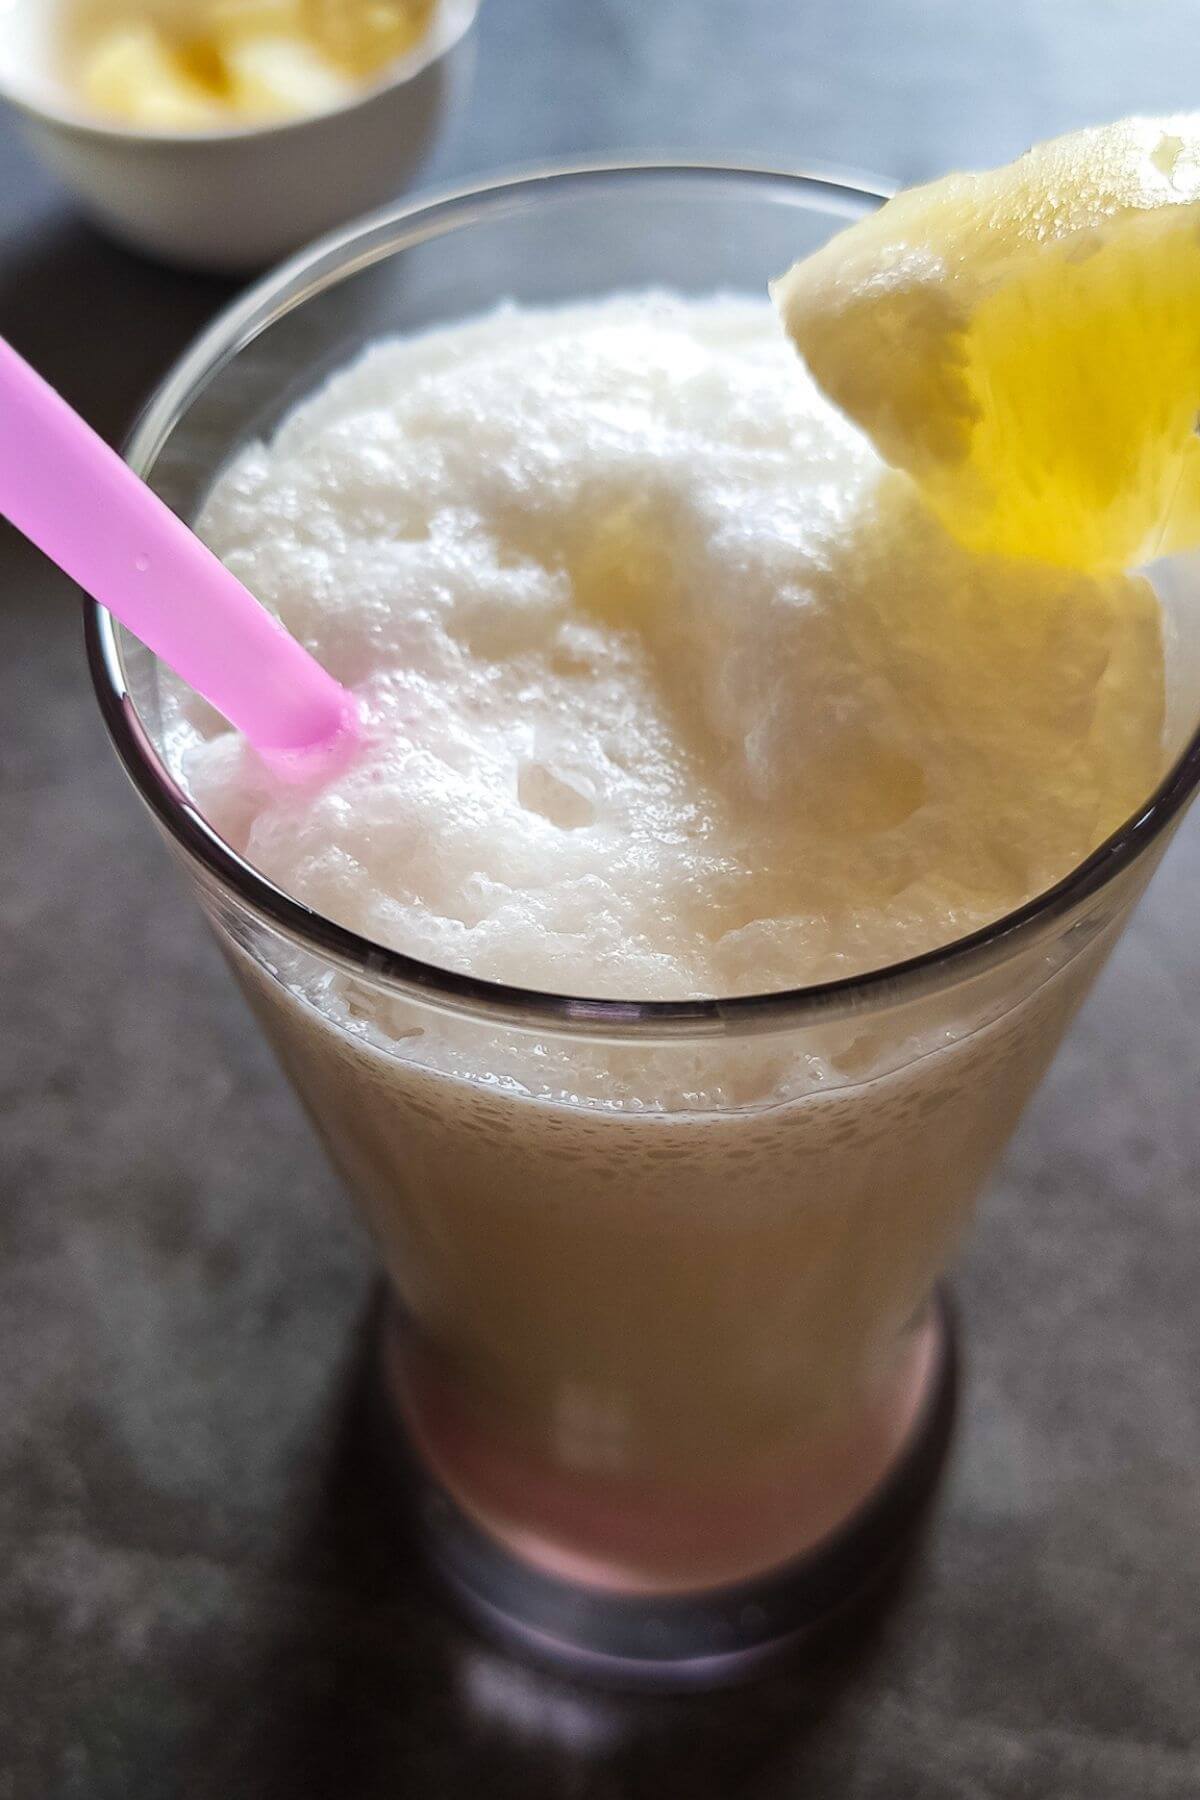 virgin pina colada garnished with a pineapple chunk and a pink straw.